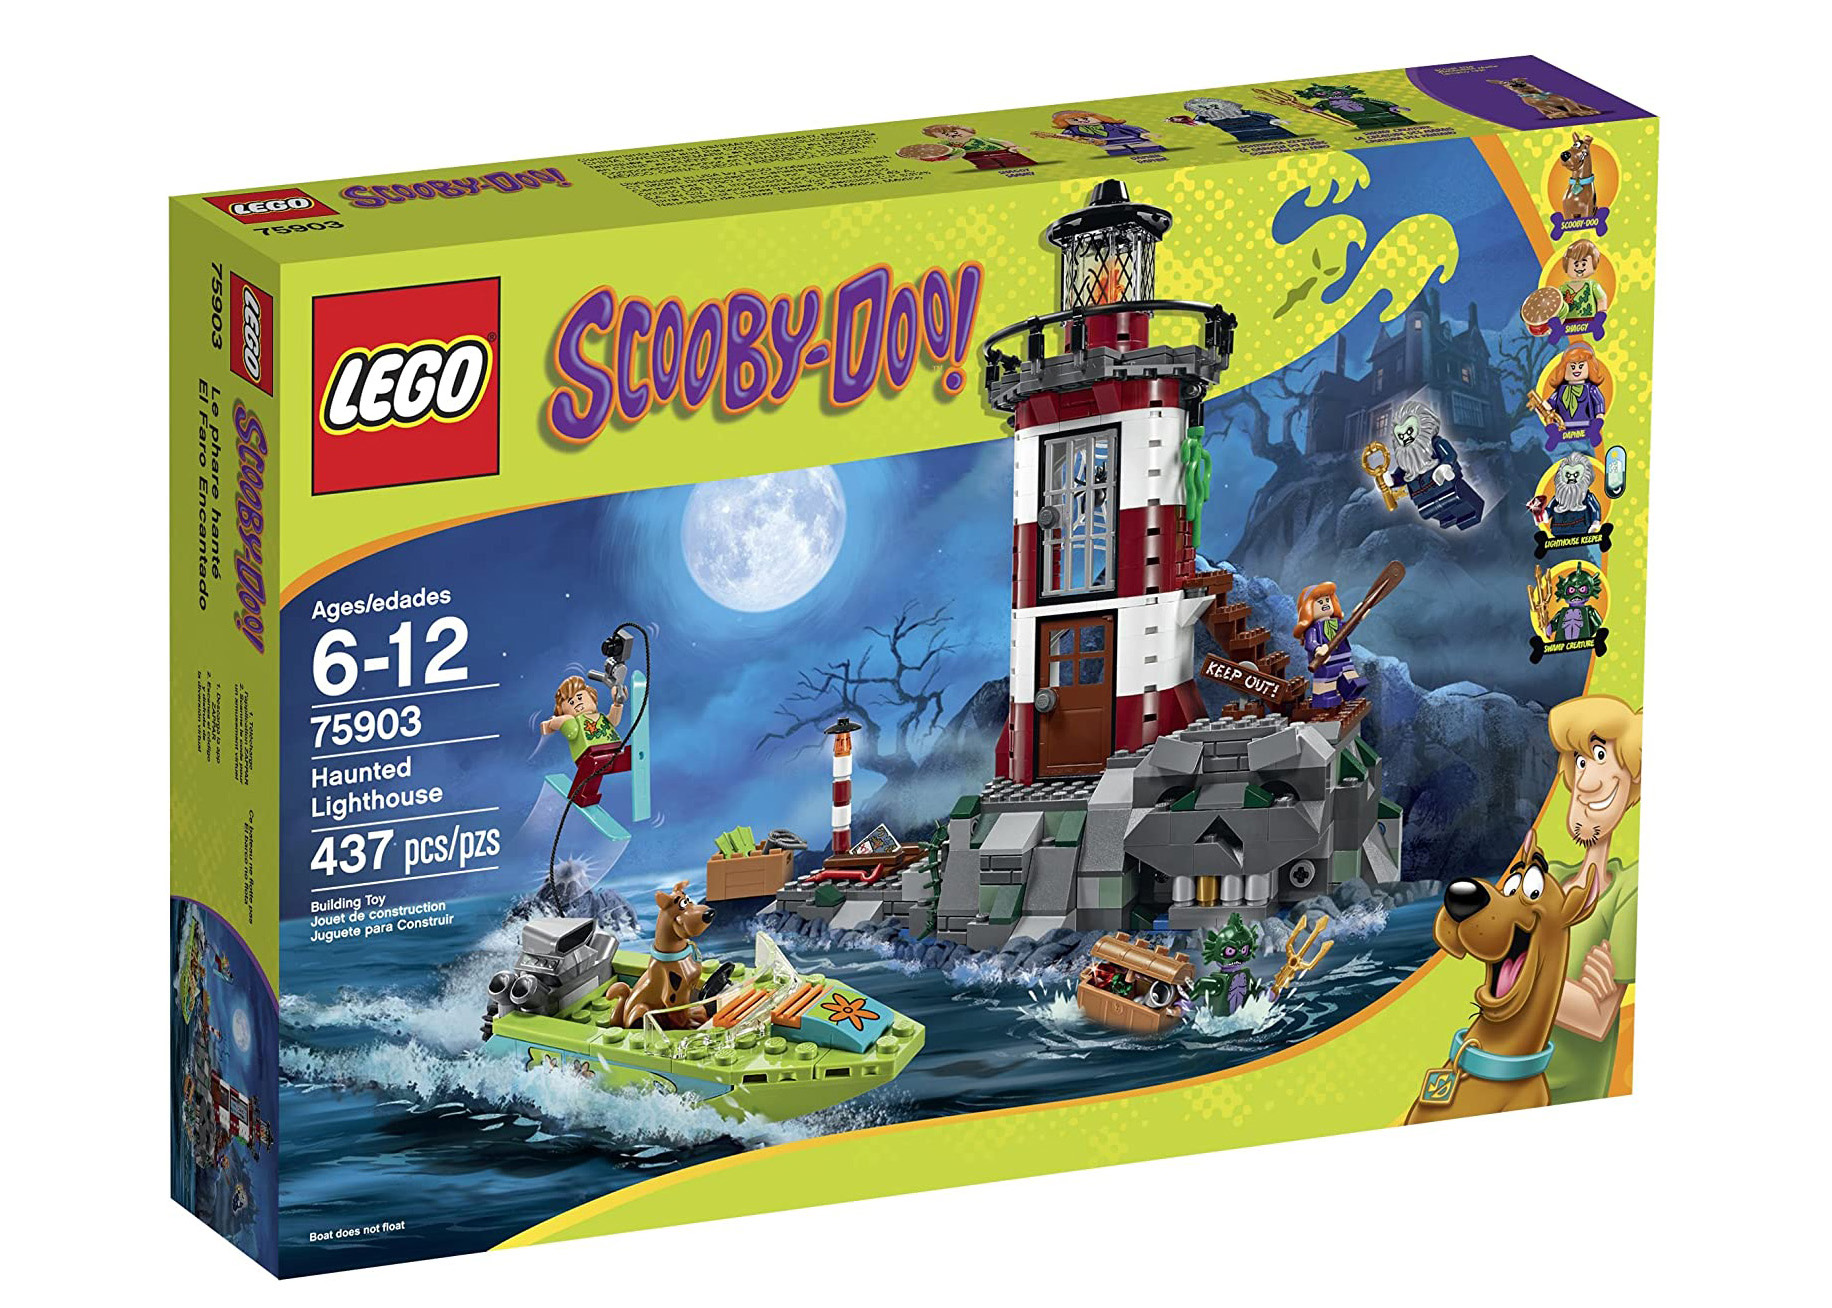 NEW⭐️ ⭐️LEGO 75903 SCOOBY-DOO HAUNTED LIGHTHOUSE 2 x MANUALS ONLY 